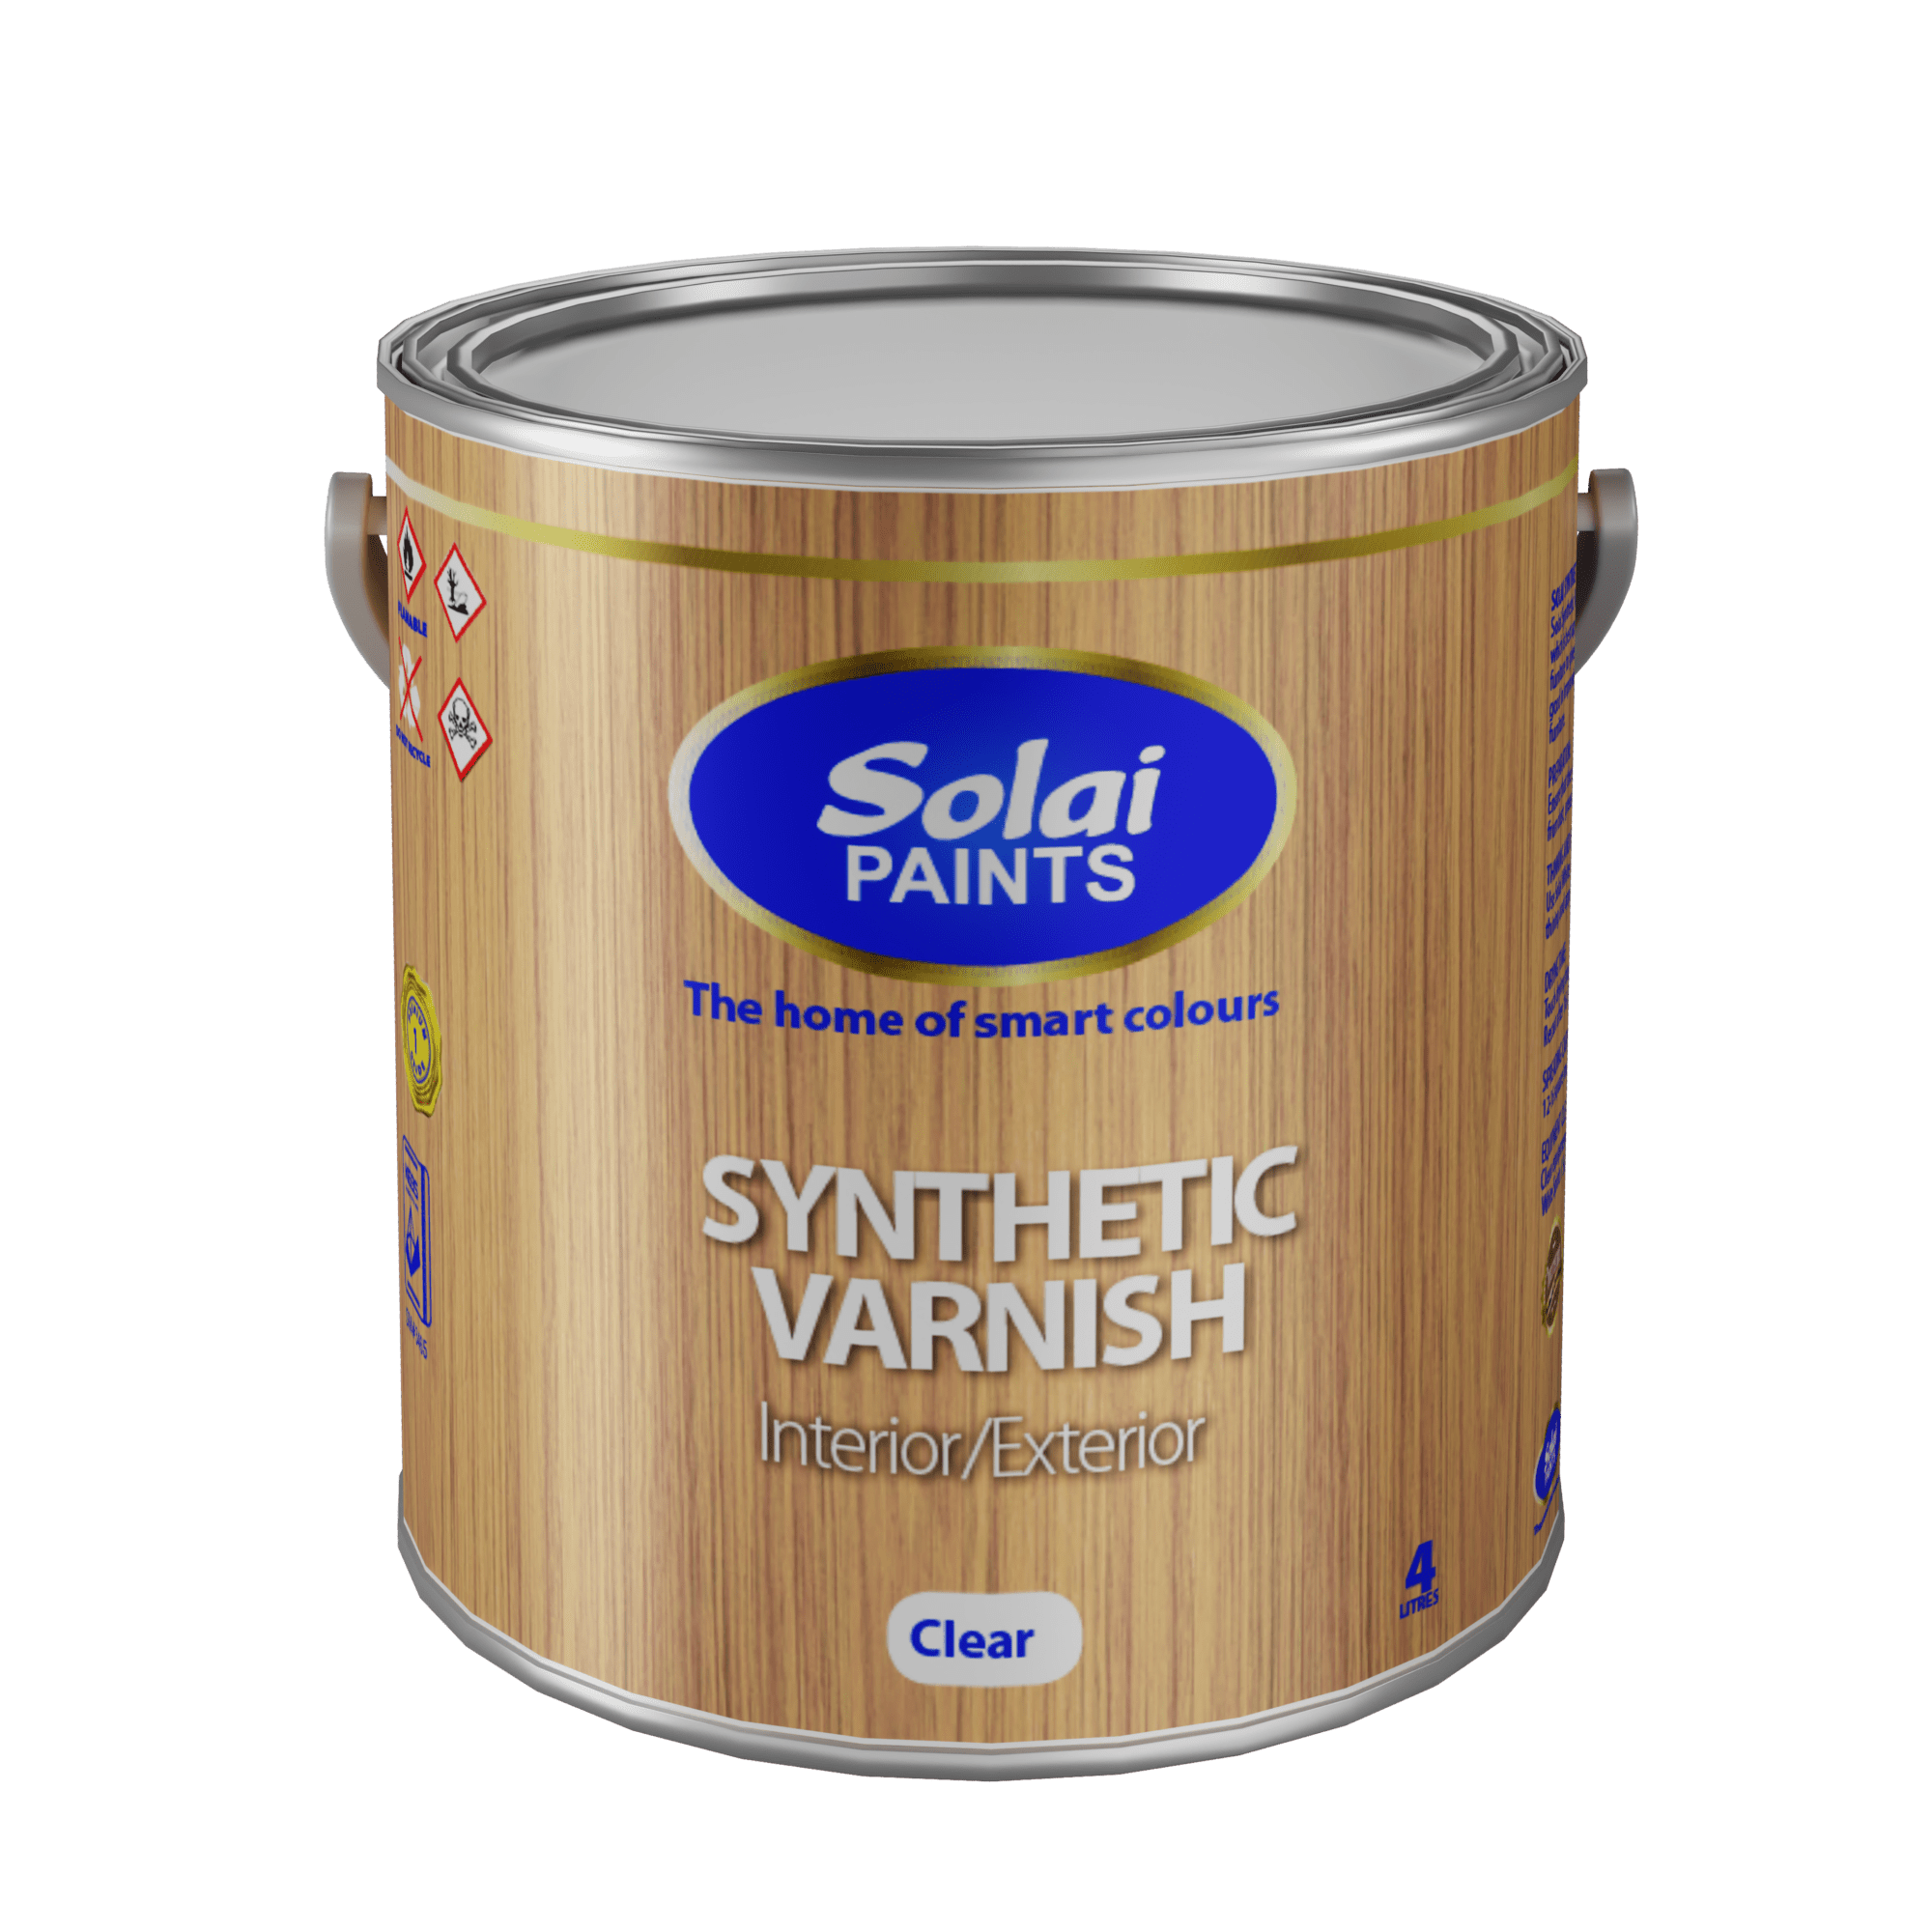 High quality interior and exterior varnish, Best Synthetic Varnish, Quality Synthetic Varnish, Most durable wood finish, Quality wood finish.